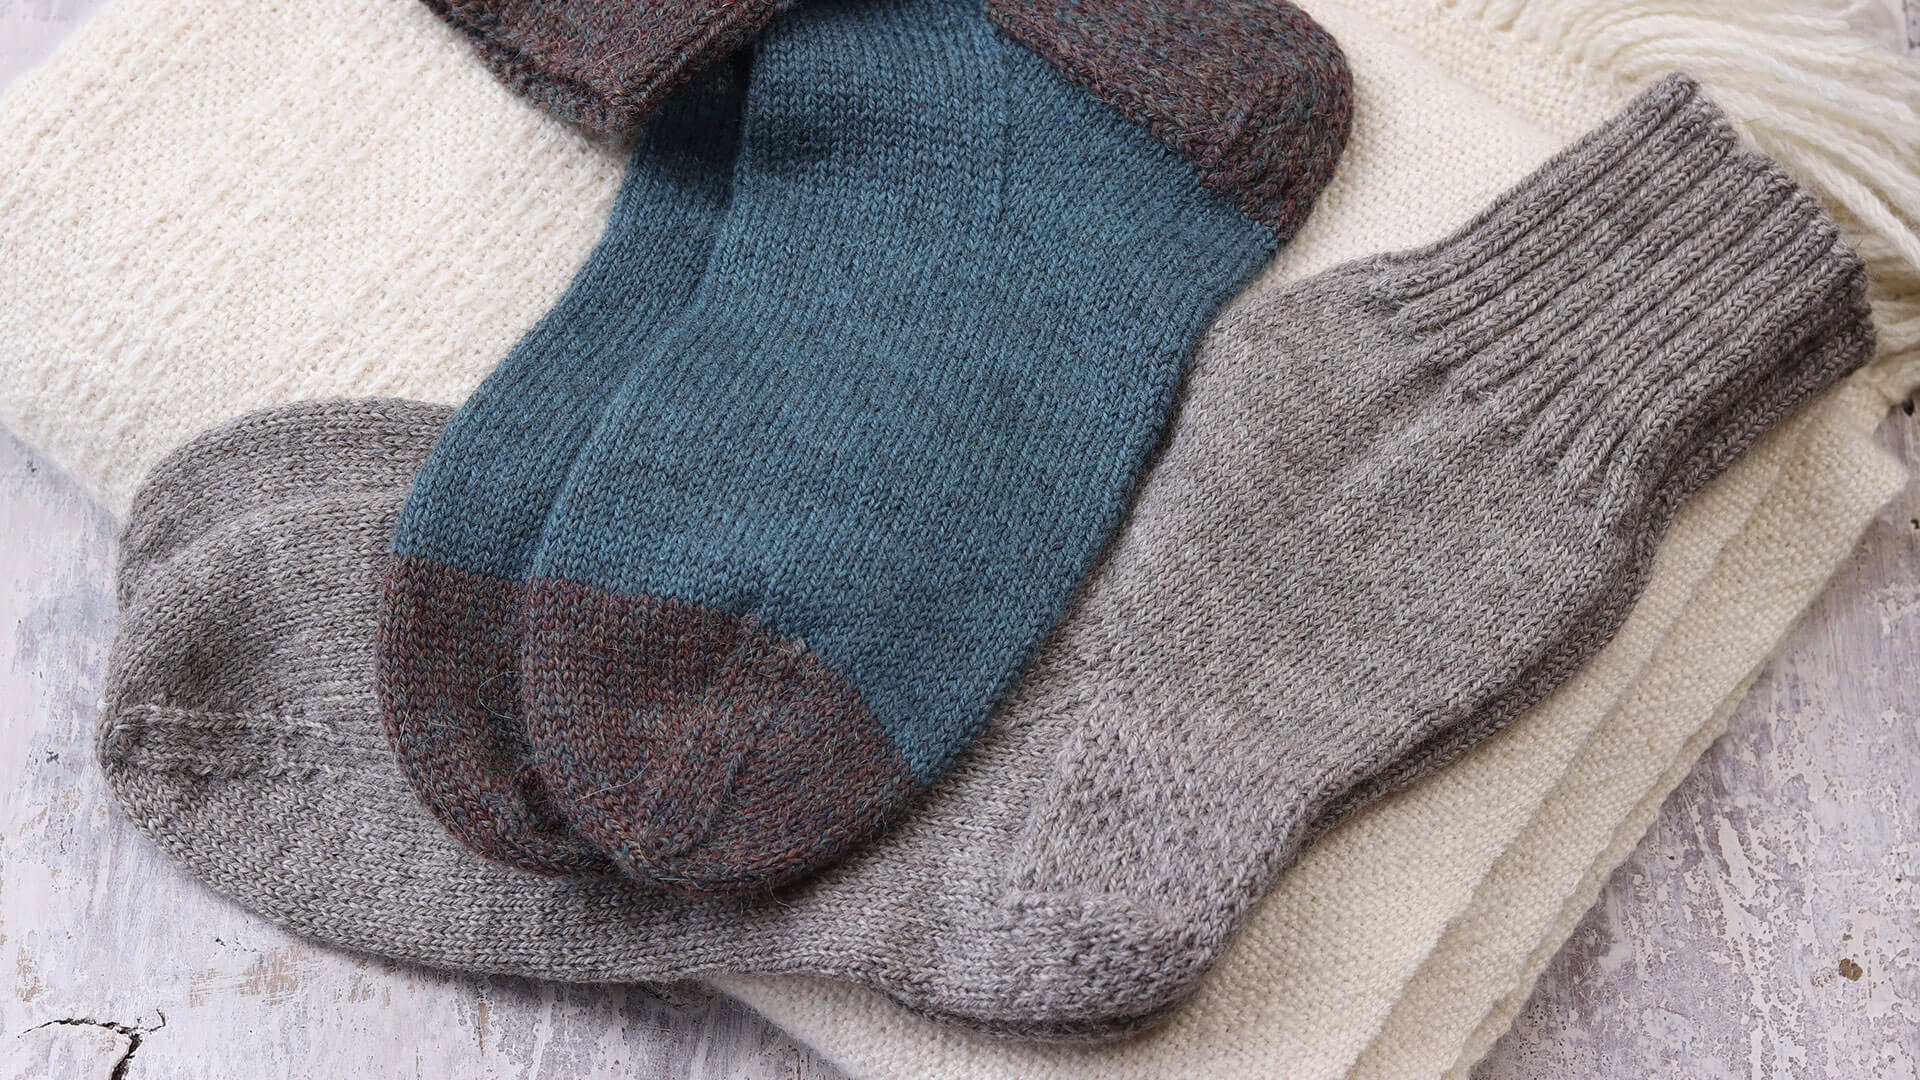 The Fibre Co Yarn - Amble - Eco-friendly and recycled Sock Yarn